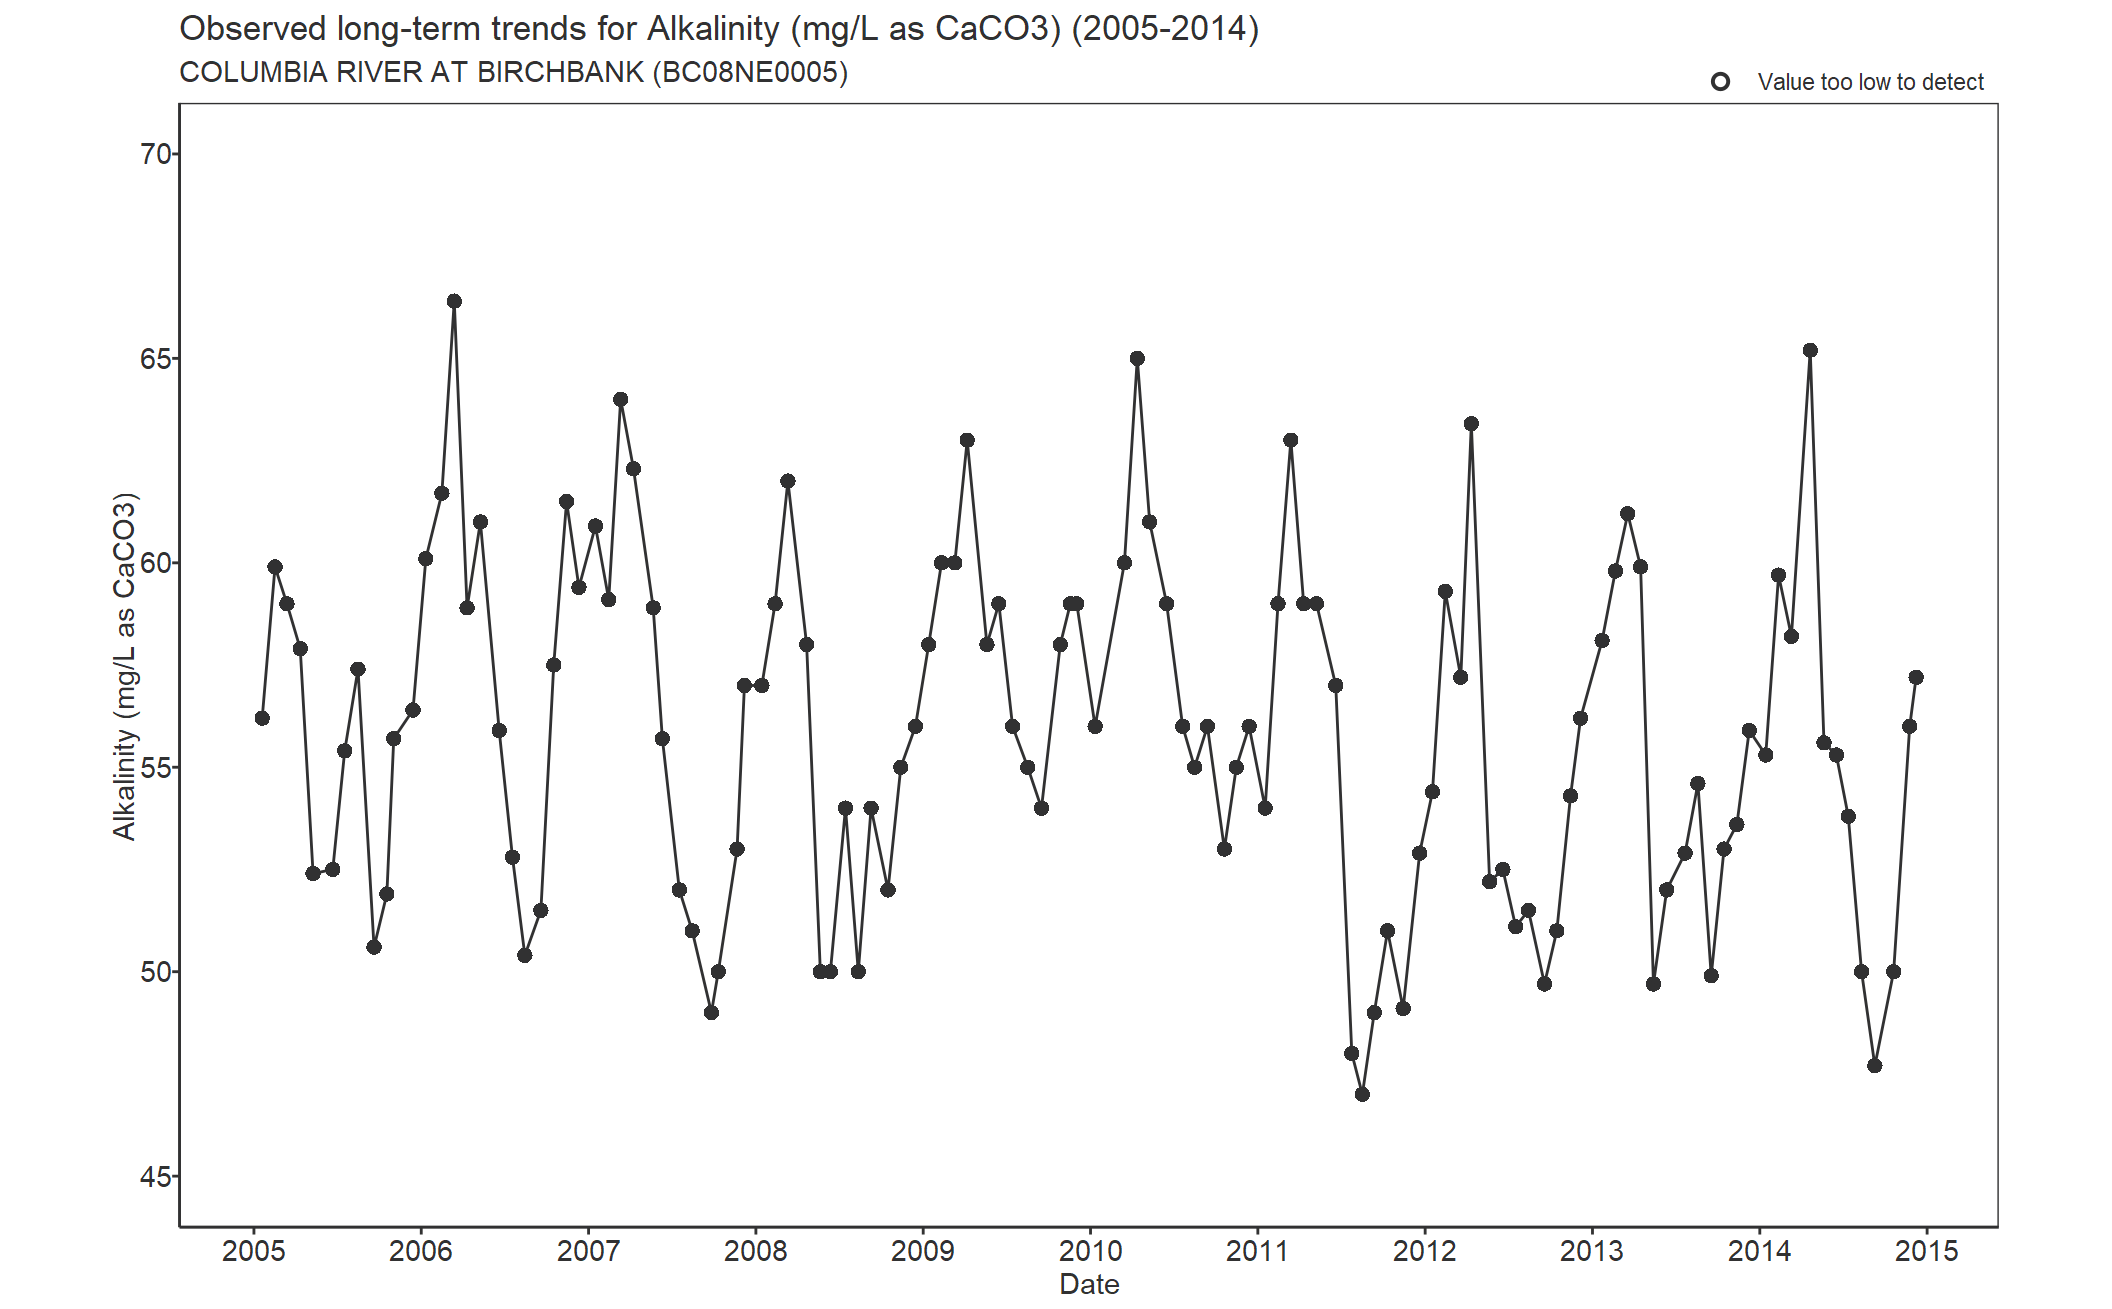 Observed long-term trends for Alkalinity Total CaCO3 (2005-2014)